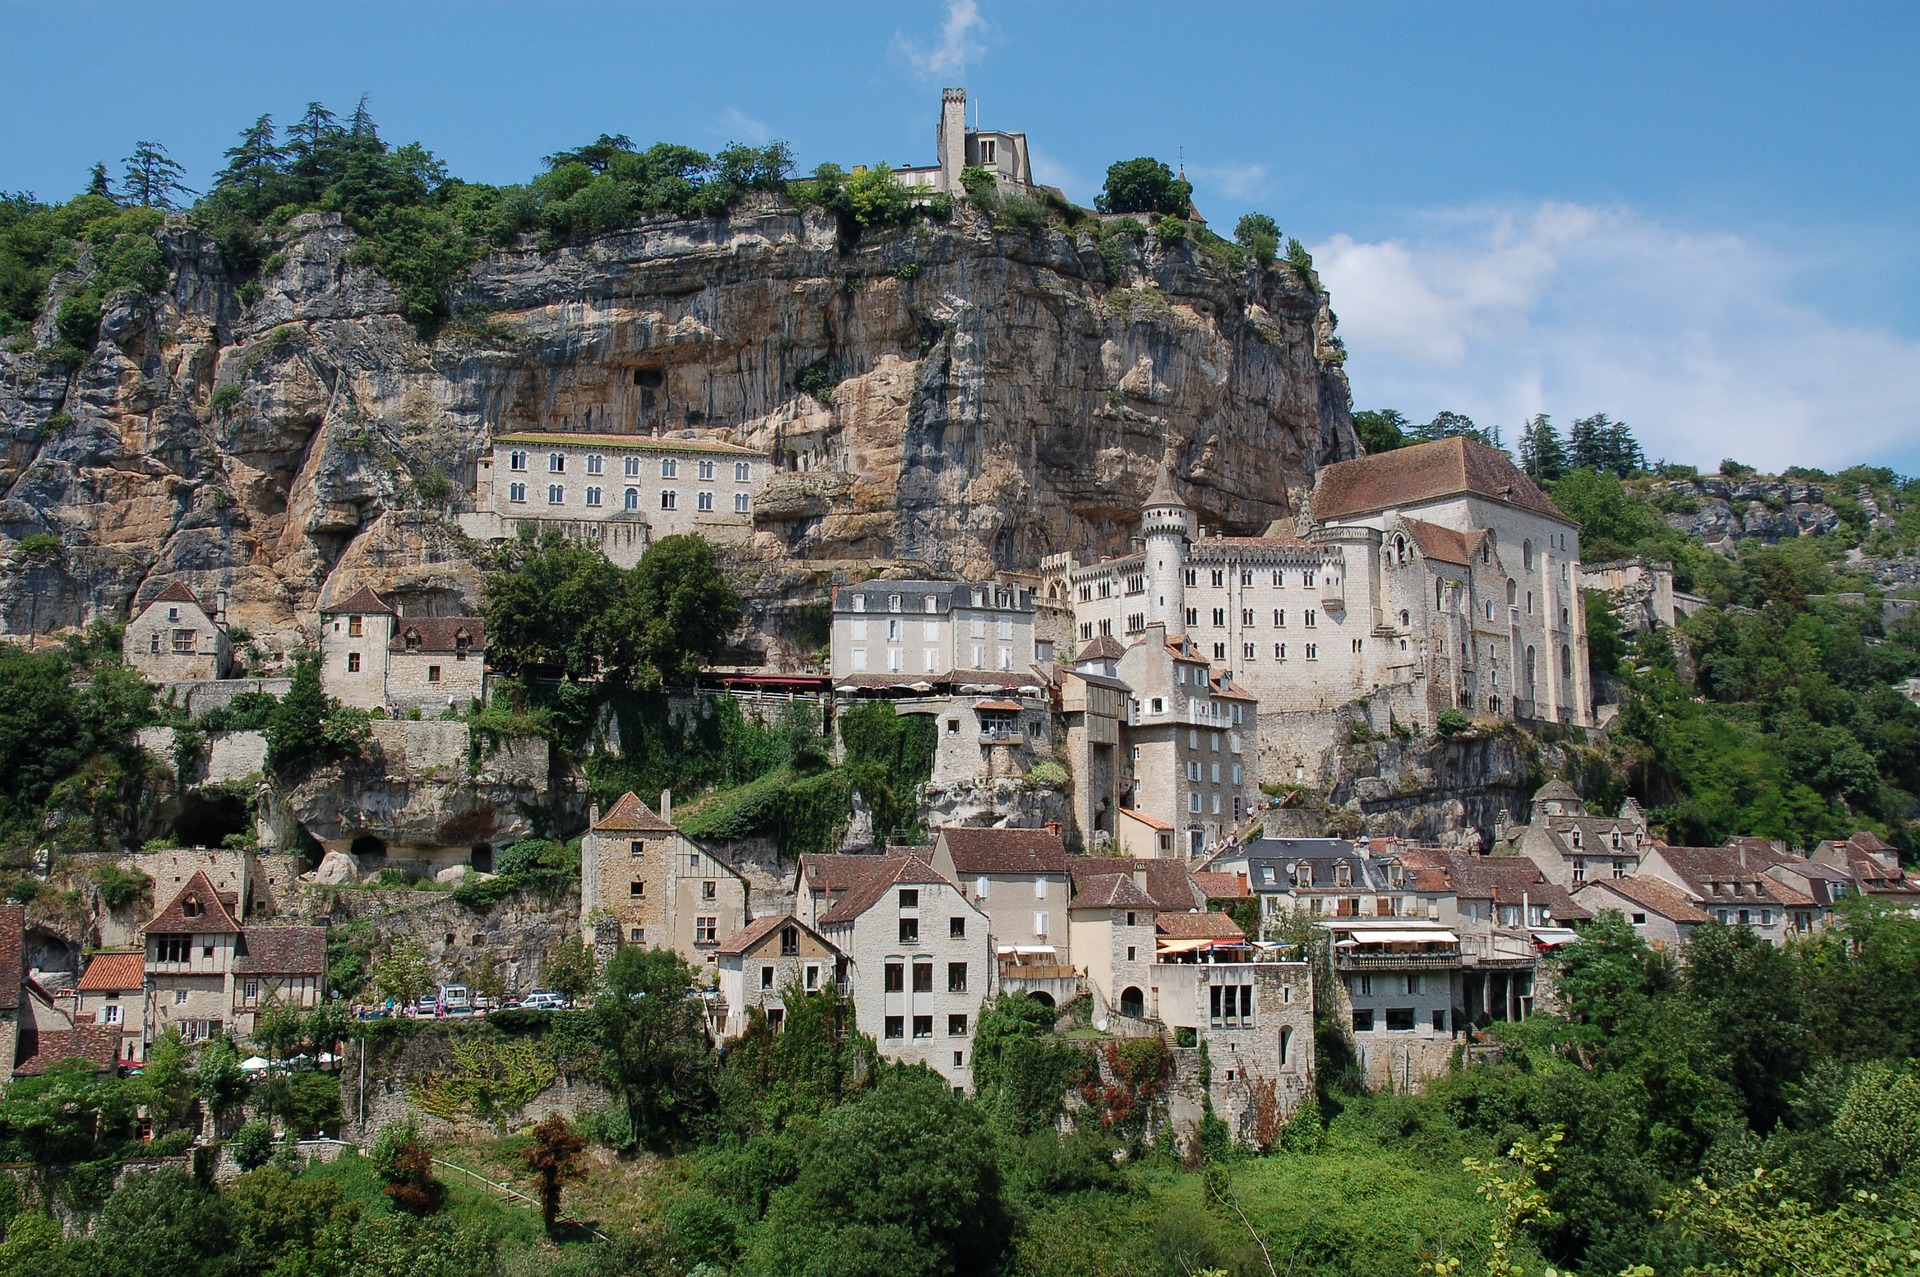 What to see in Rocamadour France